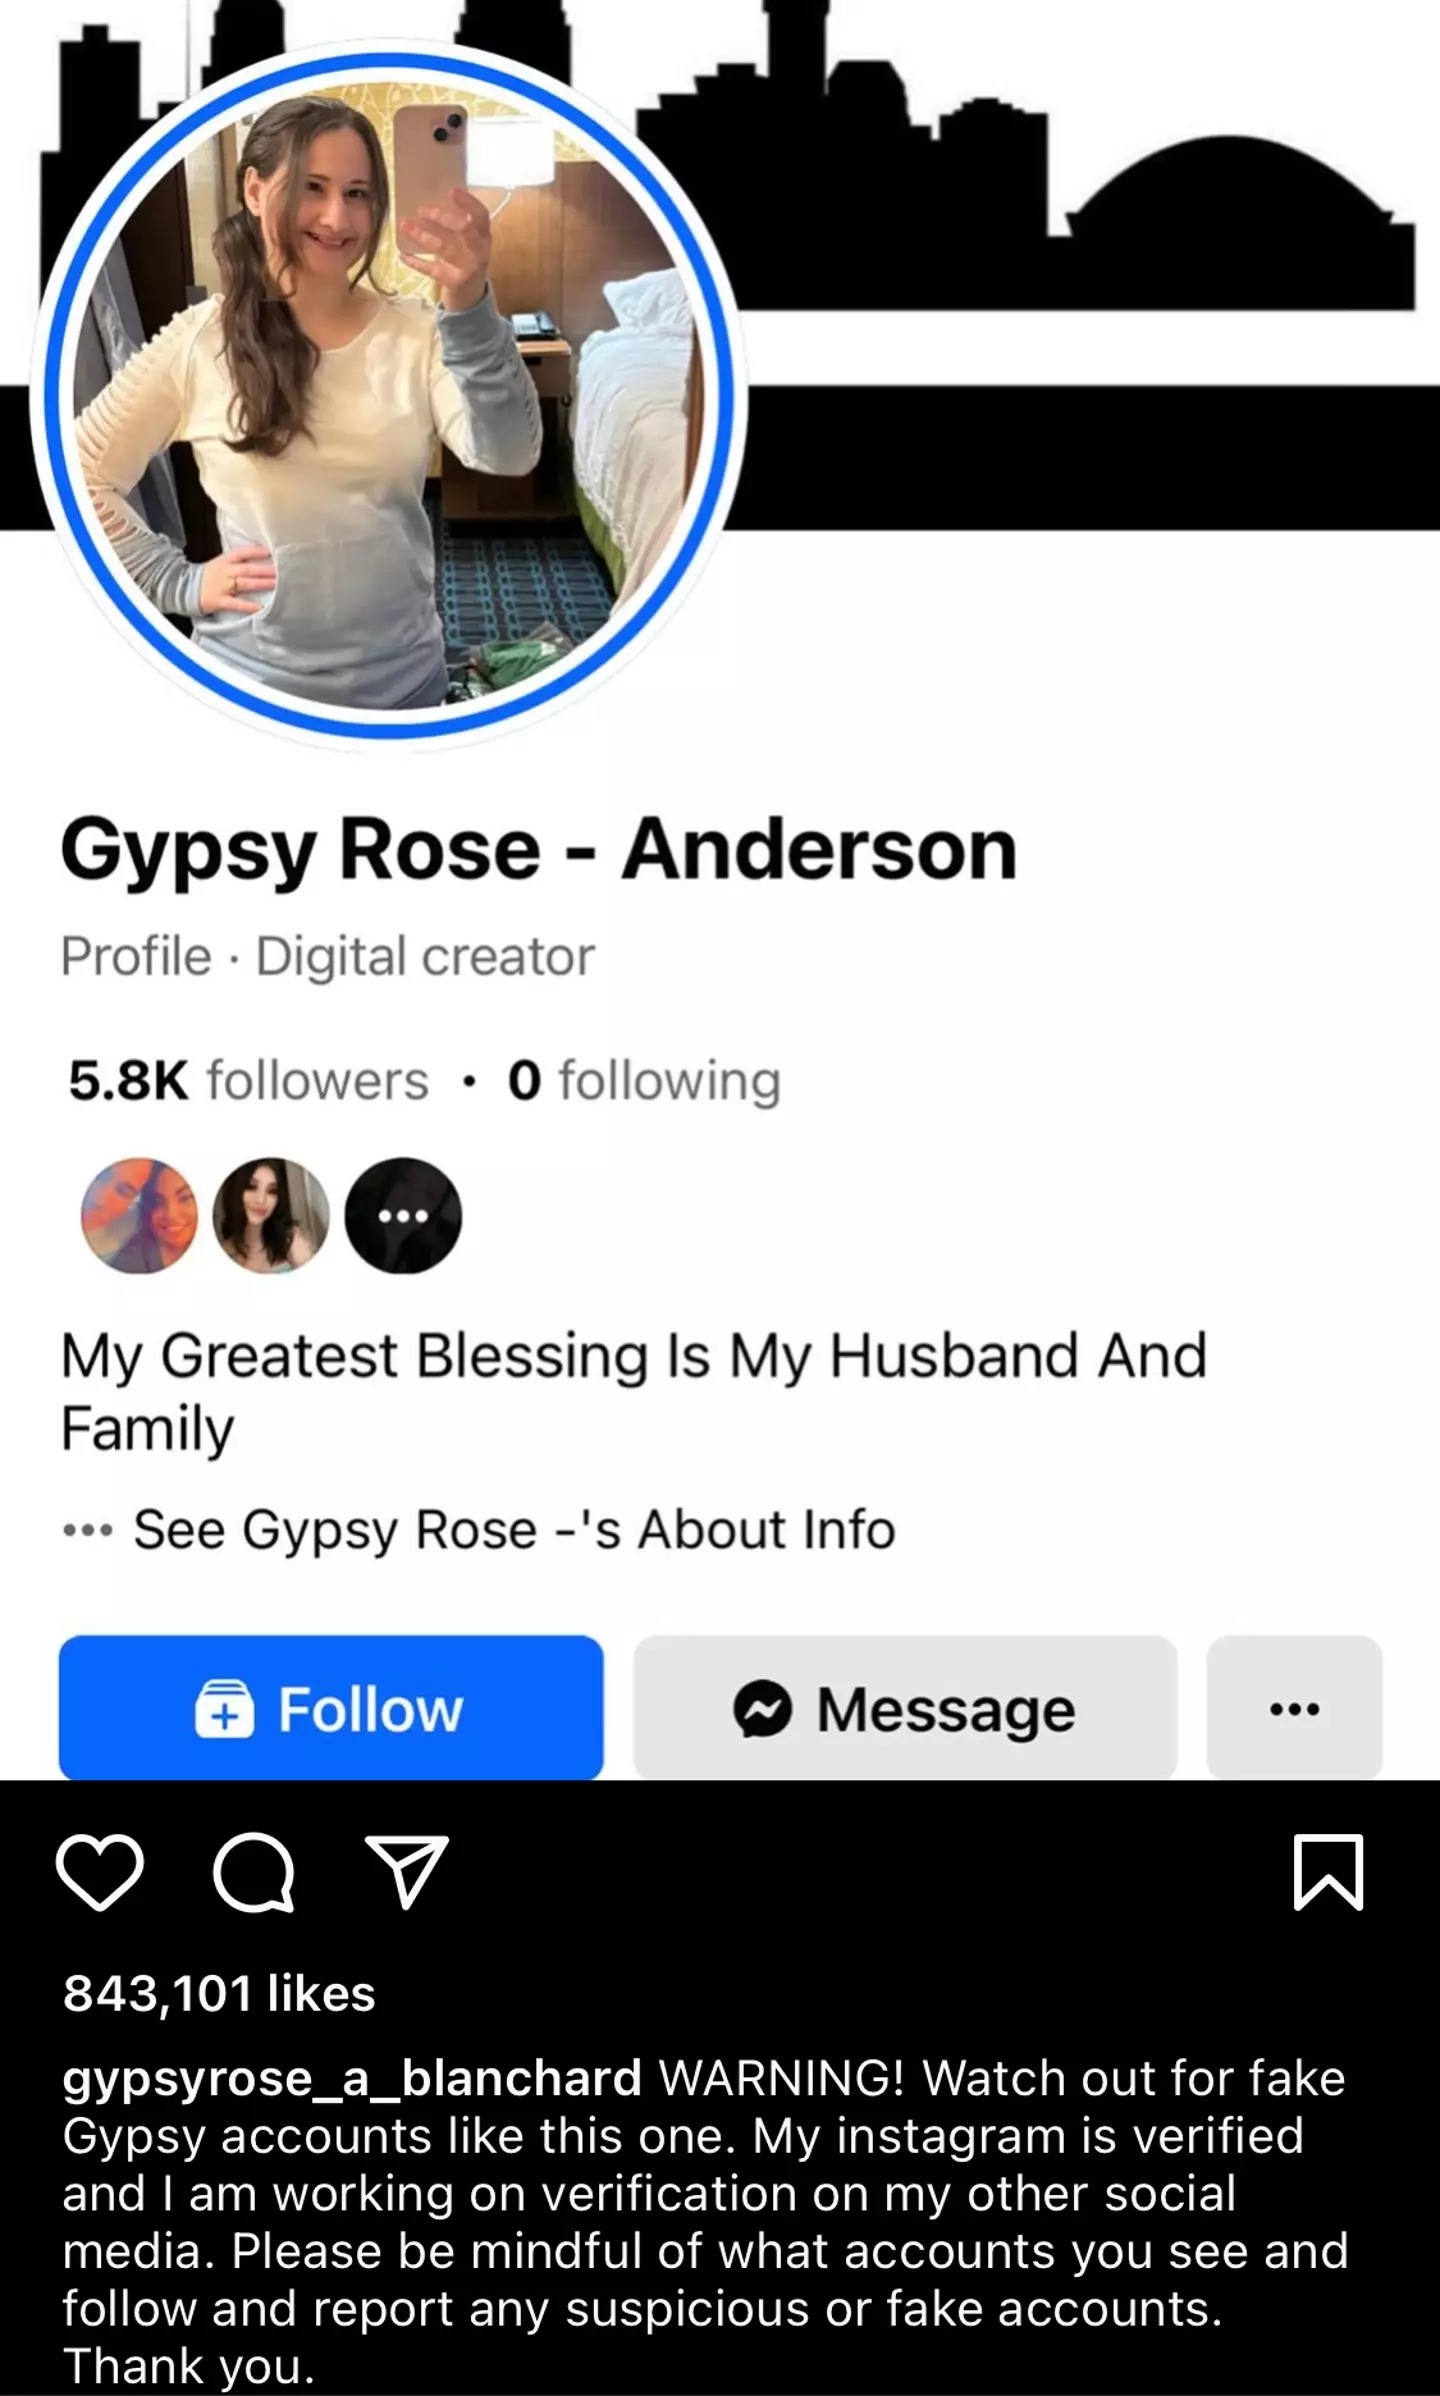 Gypsy Rose has warned her 3 million followers of profiles impersonating her online.